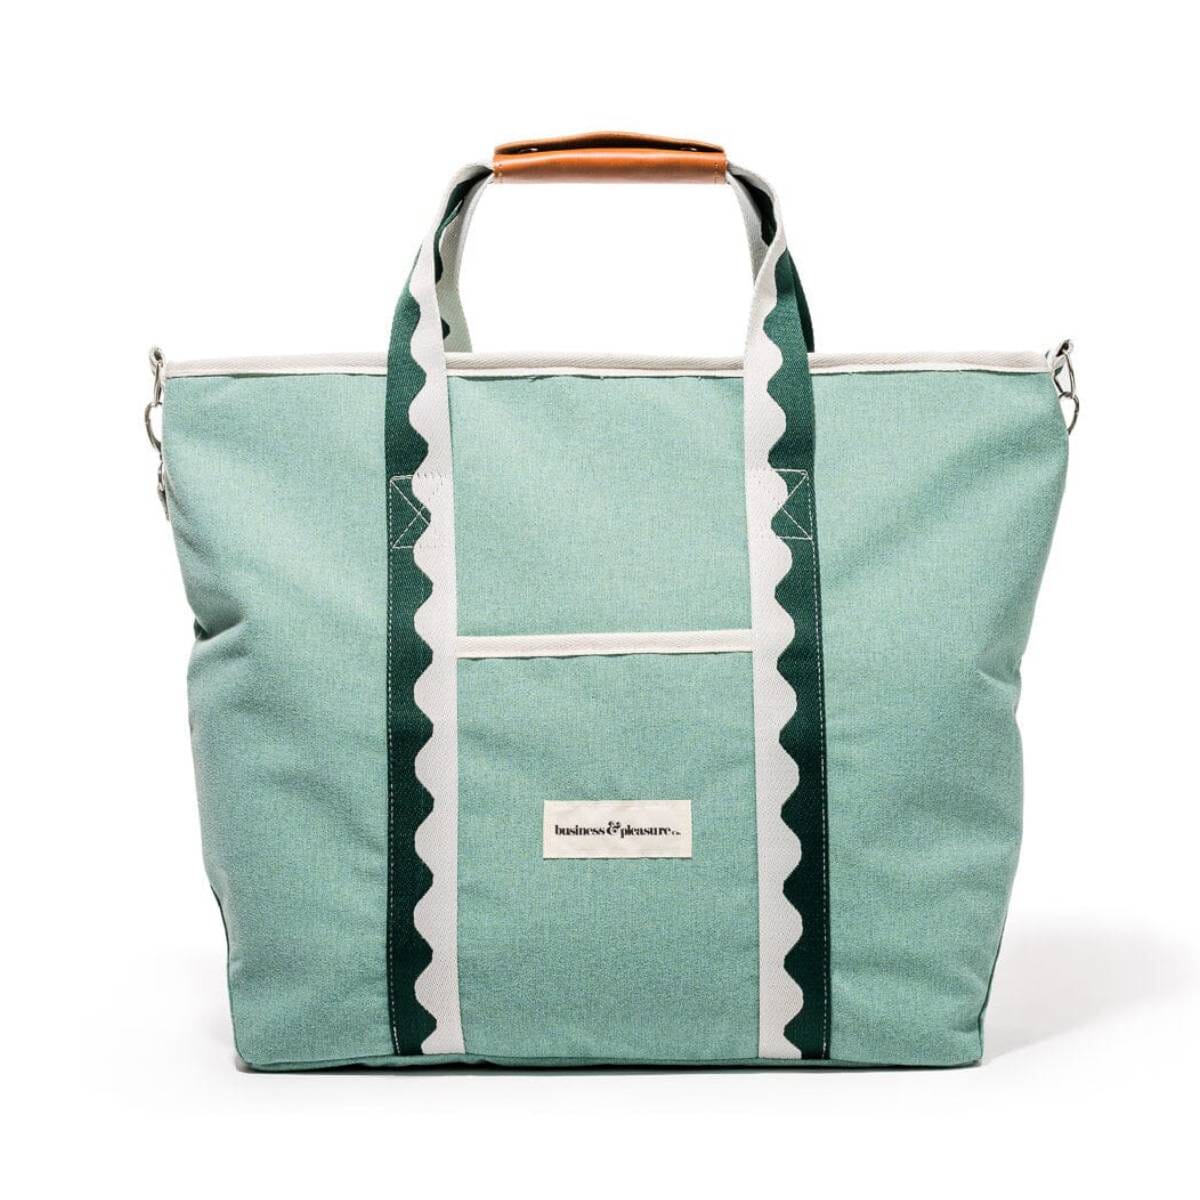 The Cooler Tote Bag - Rivie Green Cooler Tote Business & Pleasure Co Aus 